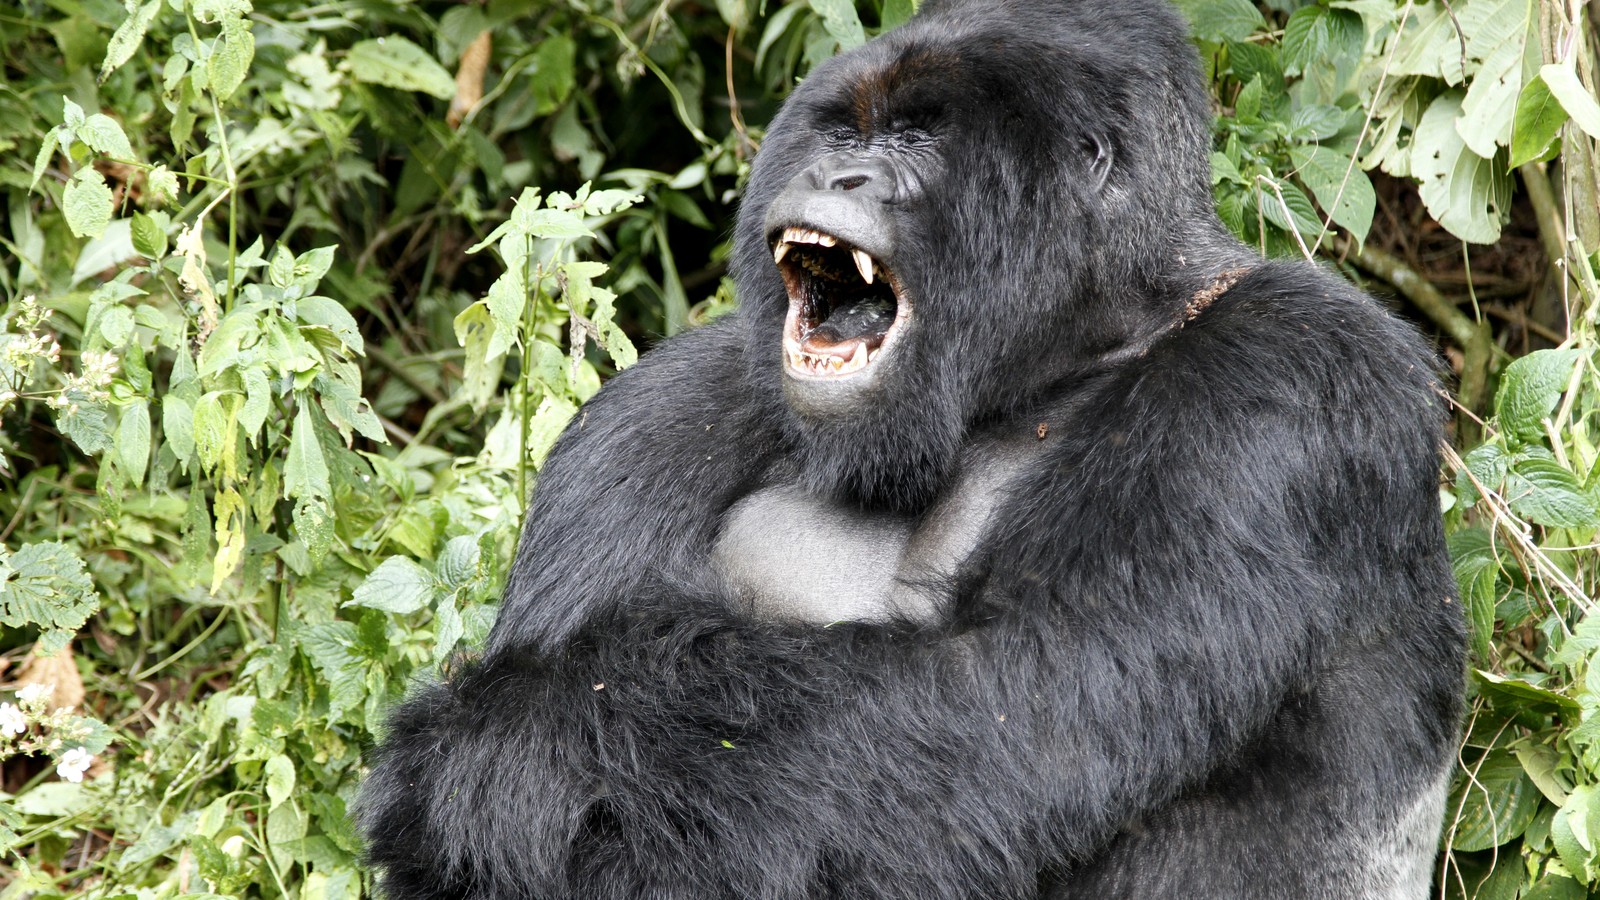 Gorilla Warfare: Why Are Apes Committing Mob Violence? - The Atlantic